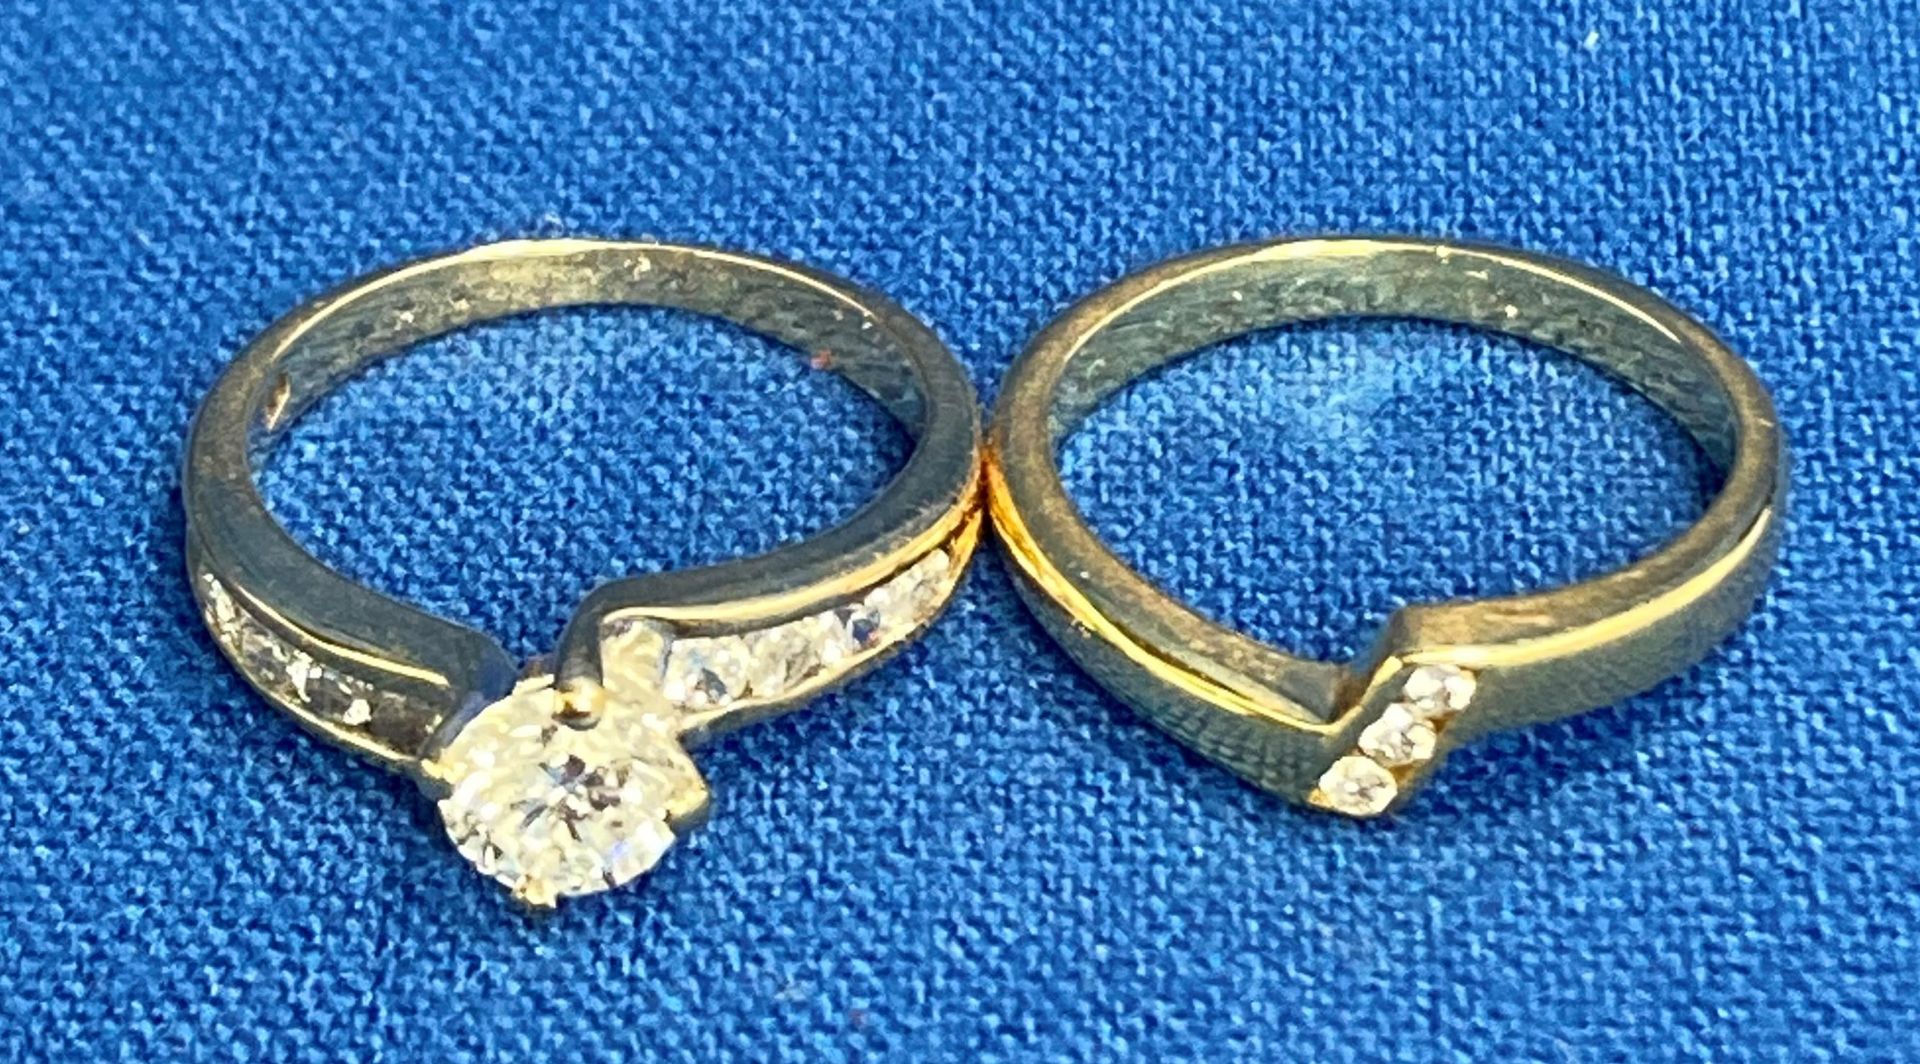 Diamond engagement ring and wedding ring set. This has a full recent valuation of £3150.